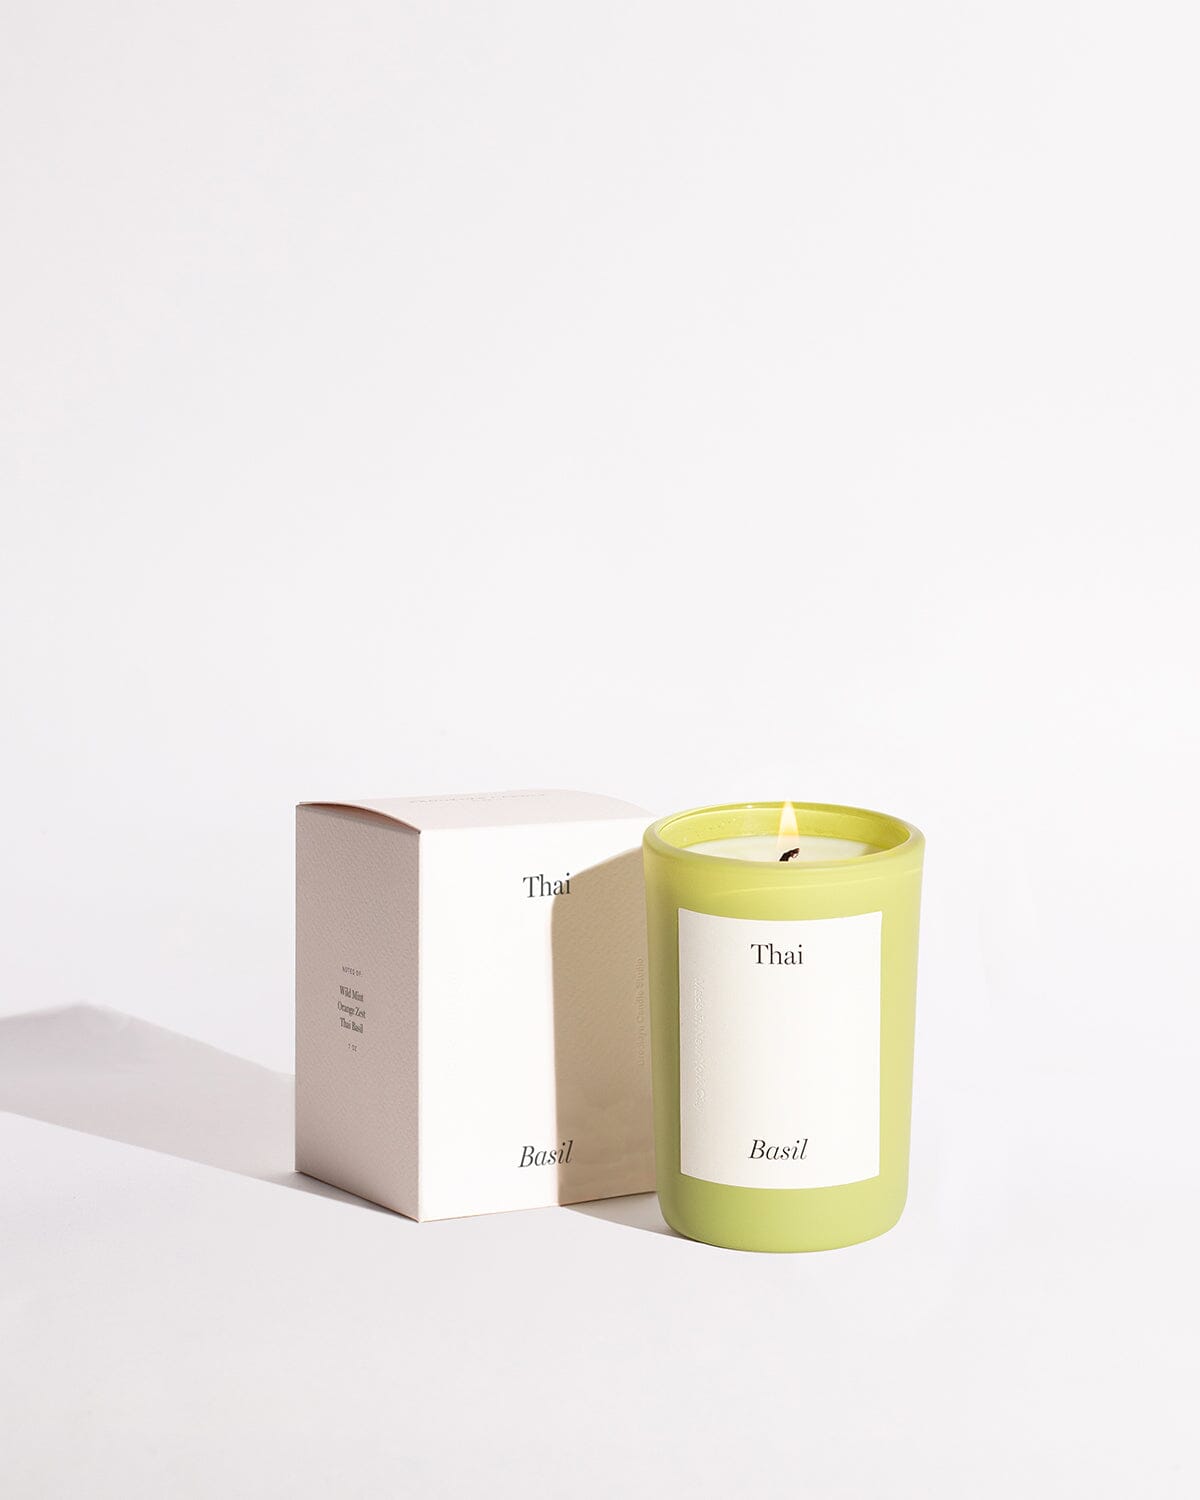 Limited Edition Thai Basil Candle Limited Edition Brooklyn Candle Studio 